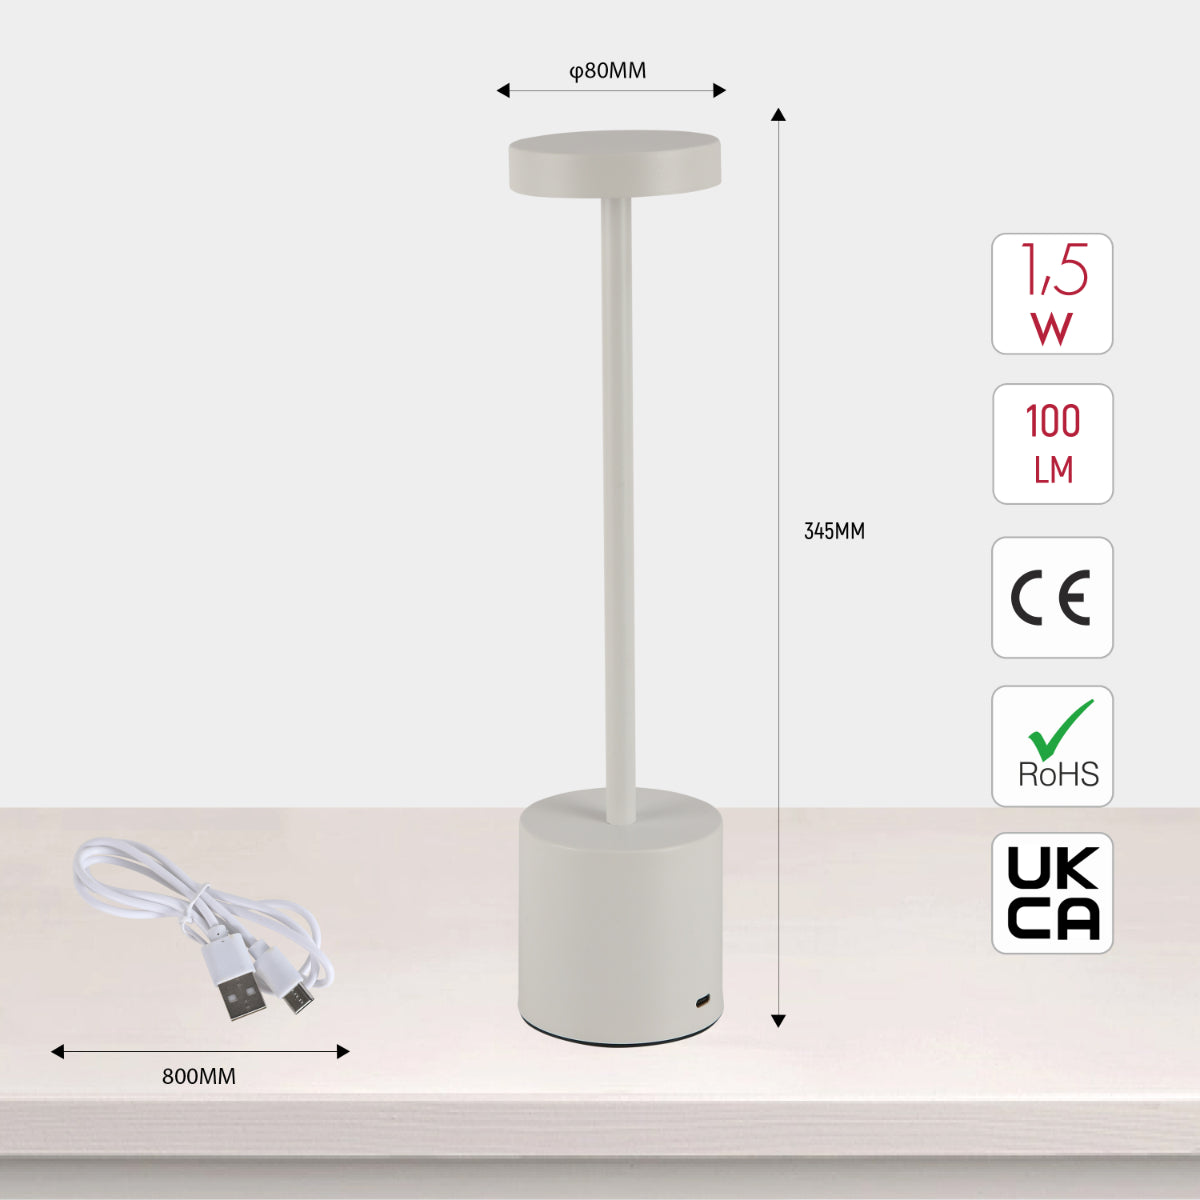 Size and certifications of Sleek Portable LED Column Lamp with CCT Control 130-03744